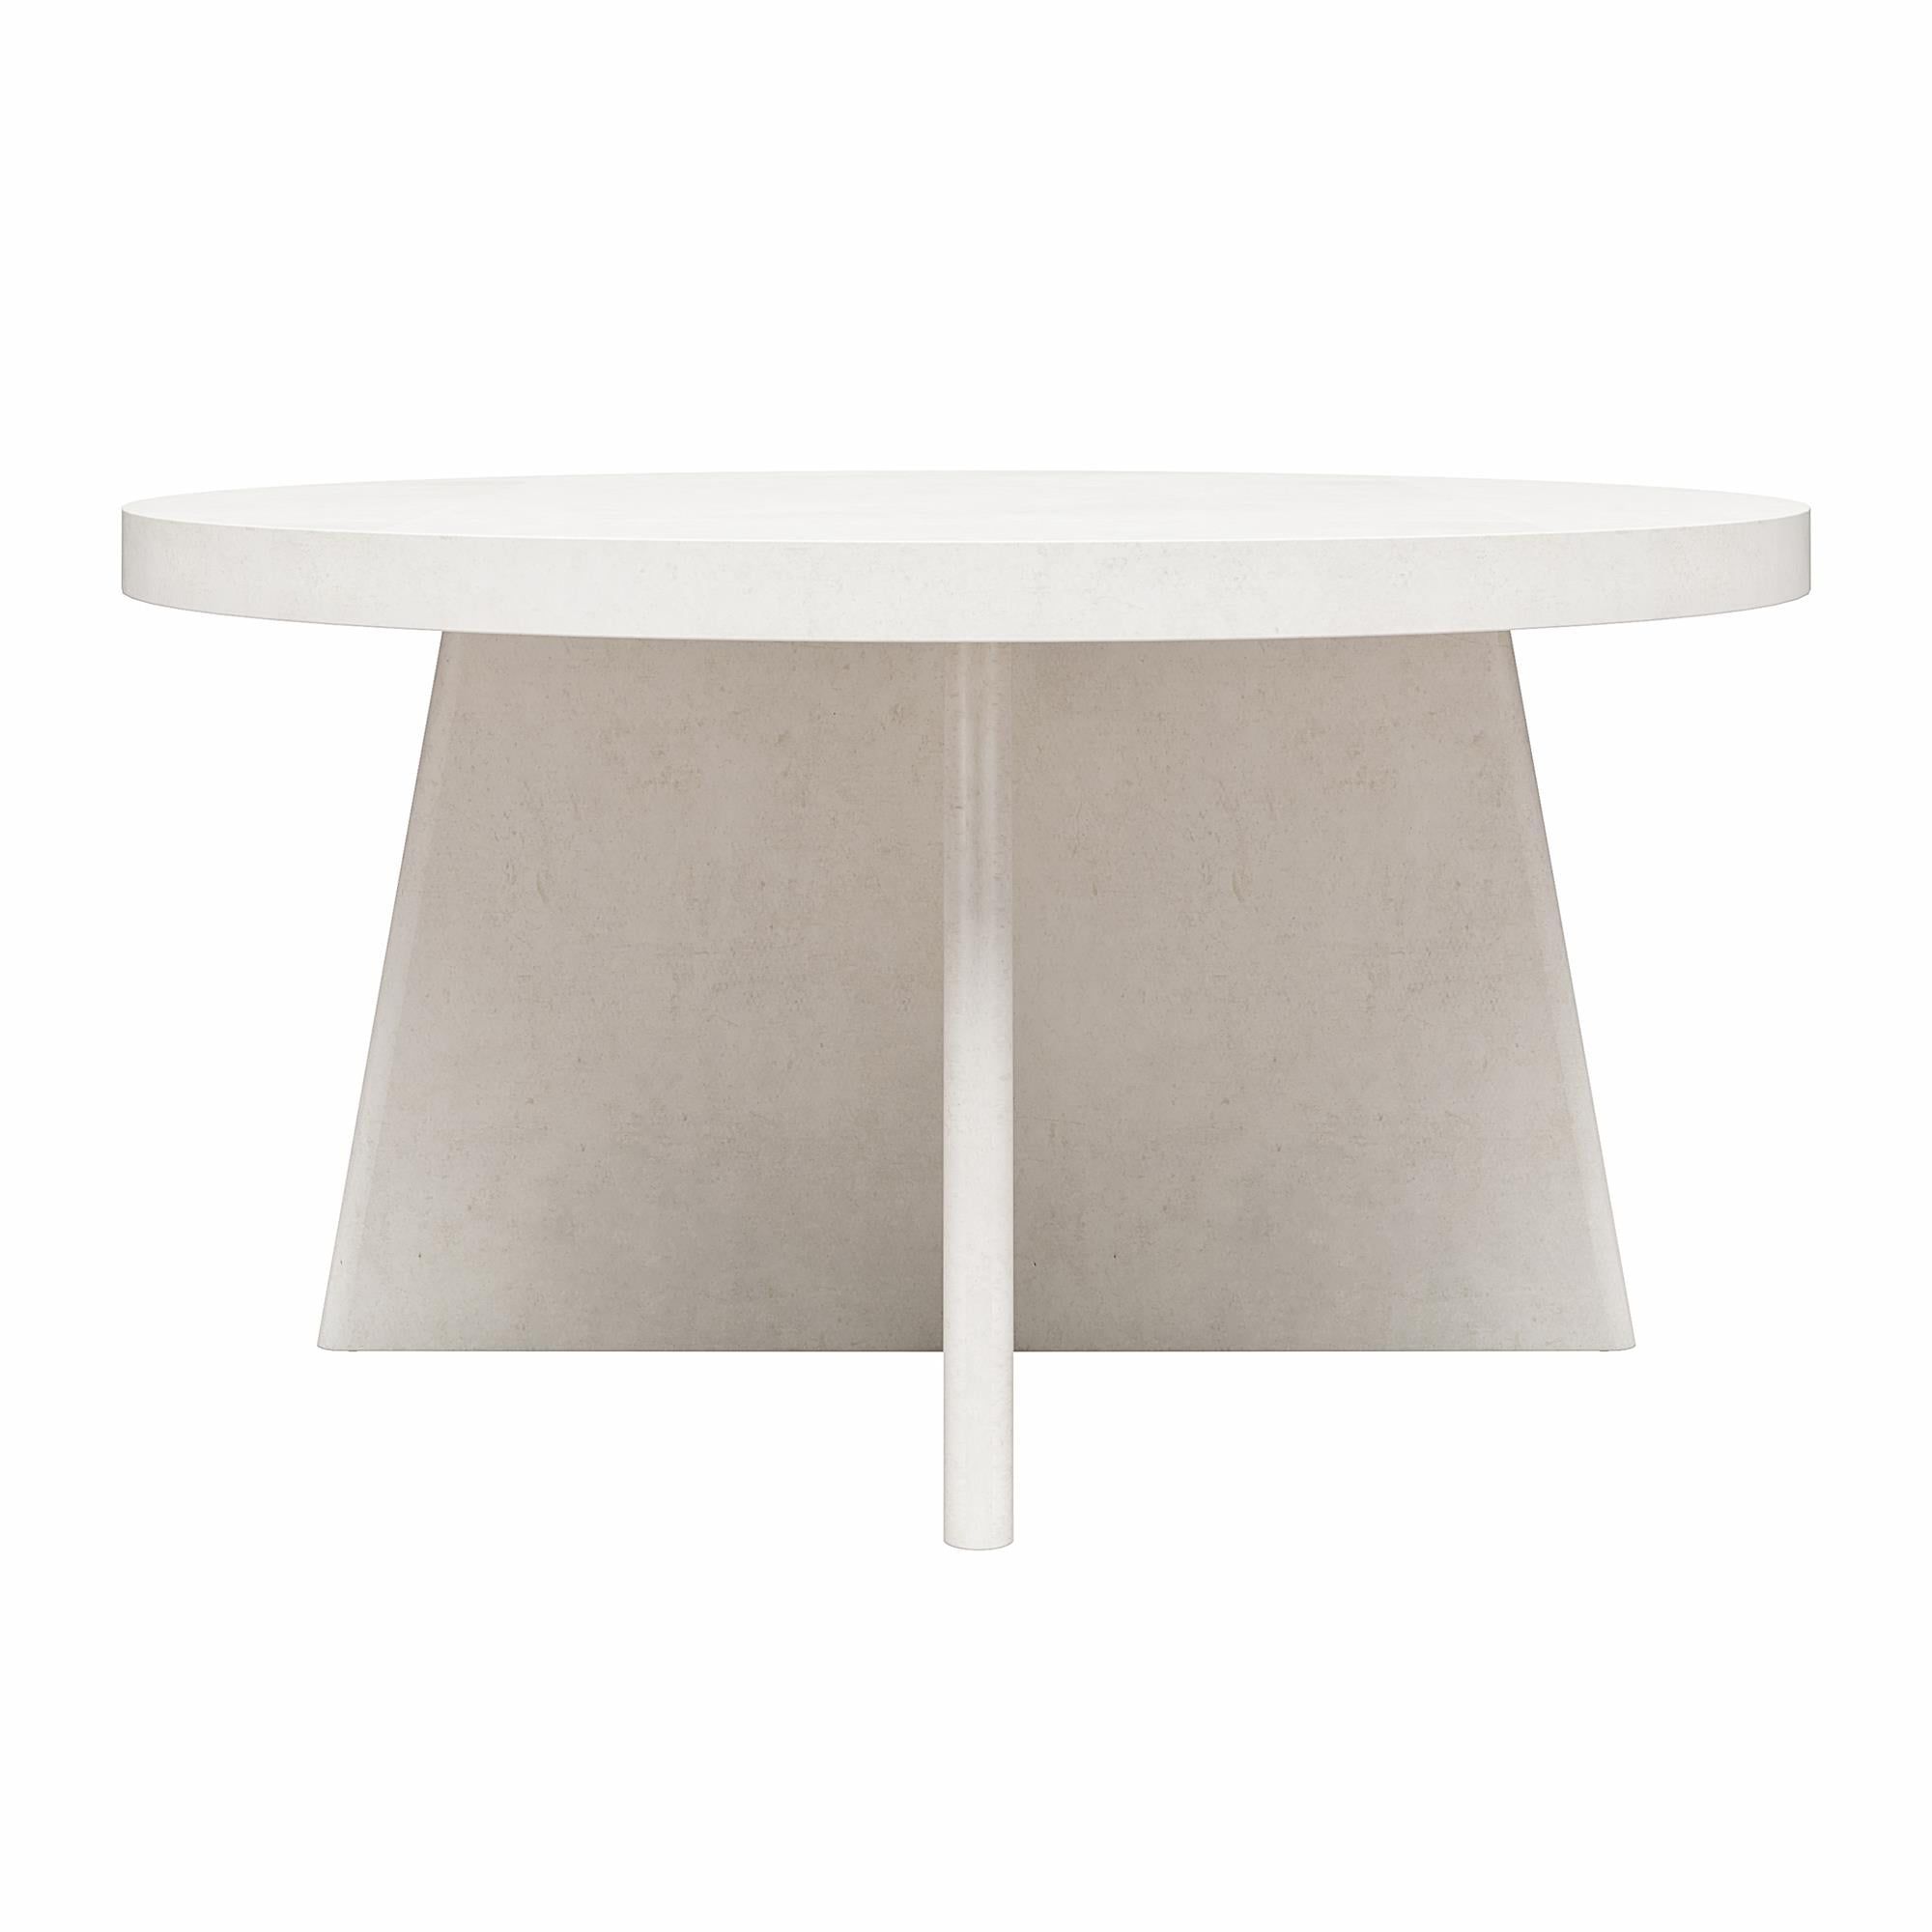 Queer Eye Liam Round Coffee Table, Plaster – Walmart In Liam Round Plaster Coffee Tables (Gallery 11 of 20)